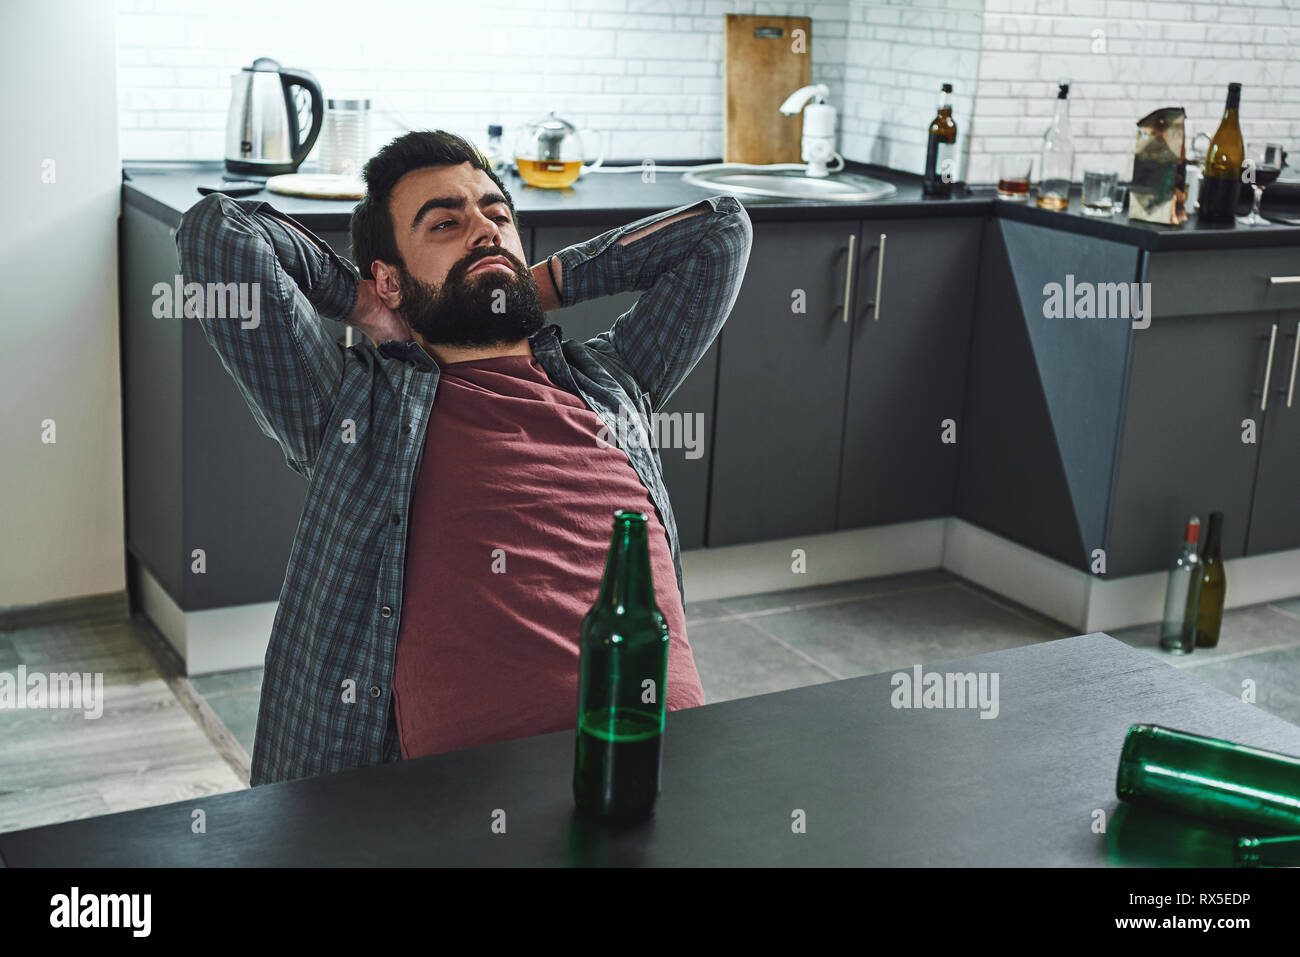 Drinking trouble. Depressed bearded man sits at the table with beer bottle in front of him. He is thinking about problems at work and troubles in rela Stock Photo